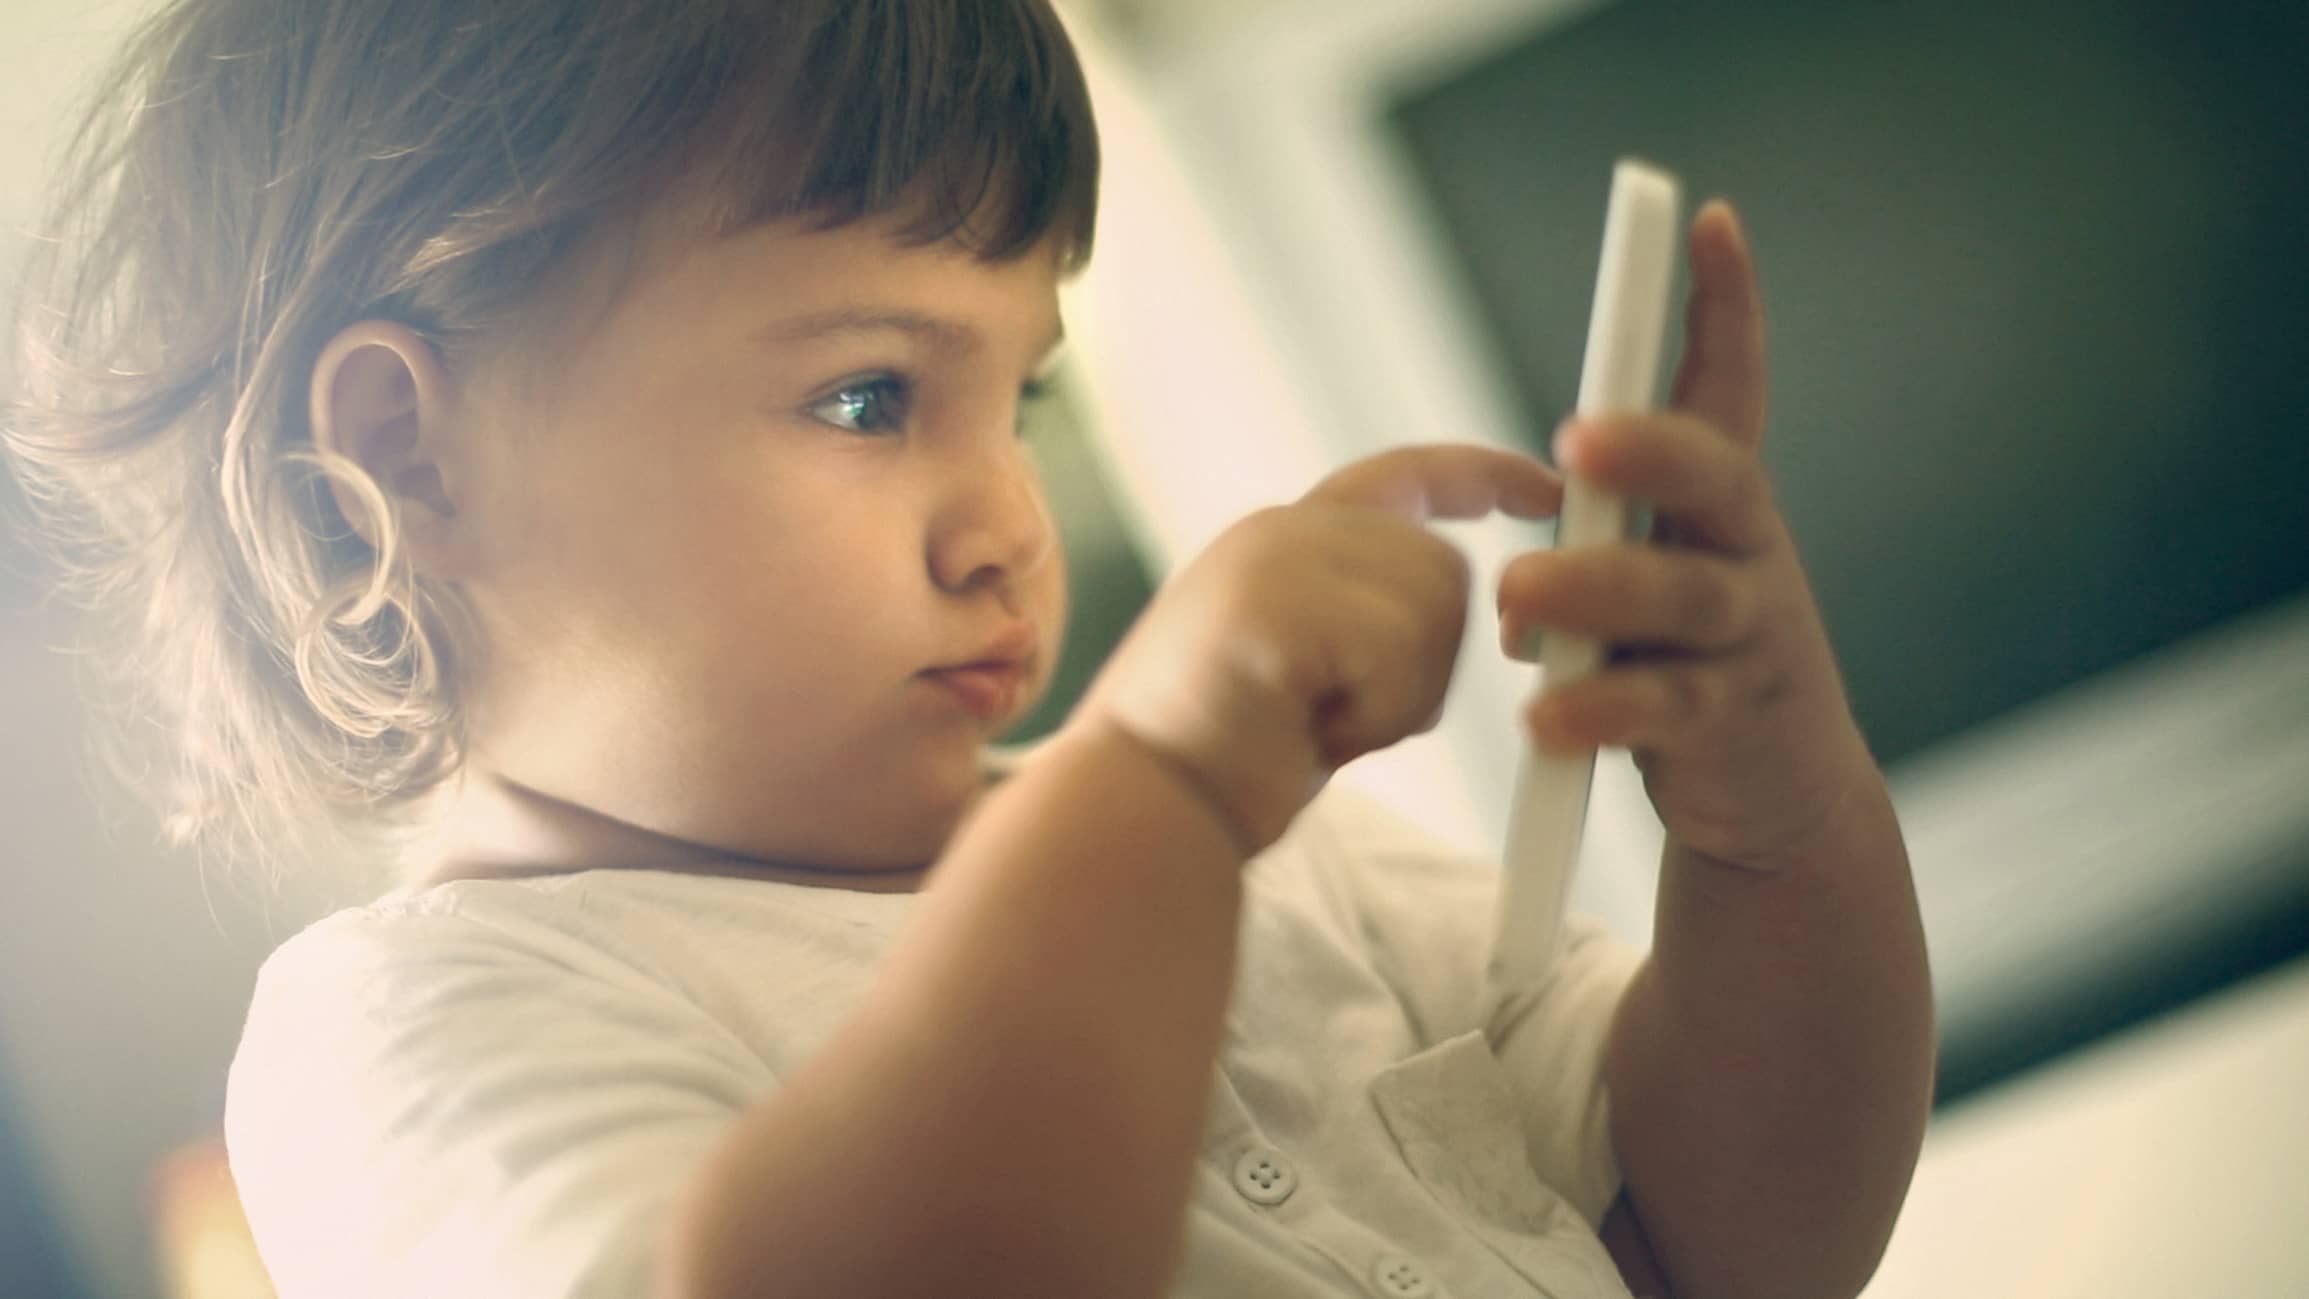 Kids' Screen Time and How It Affects Their Behavior